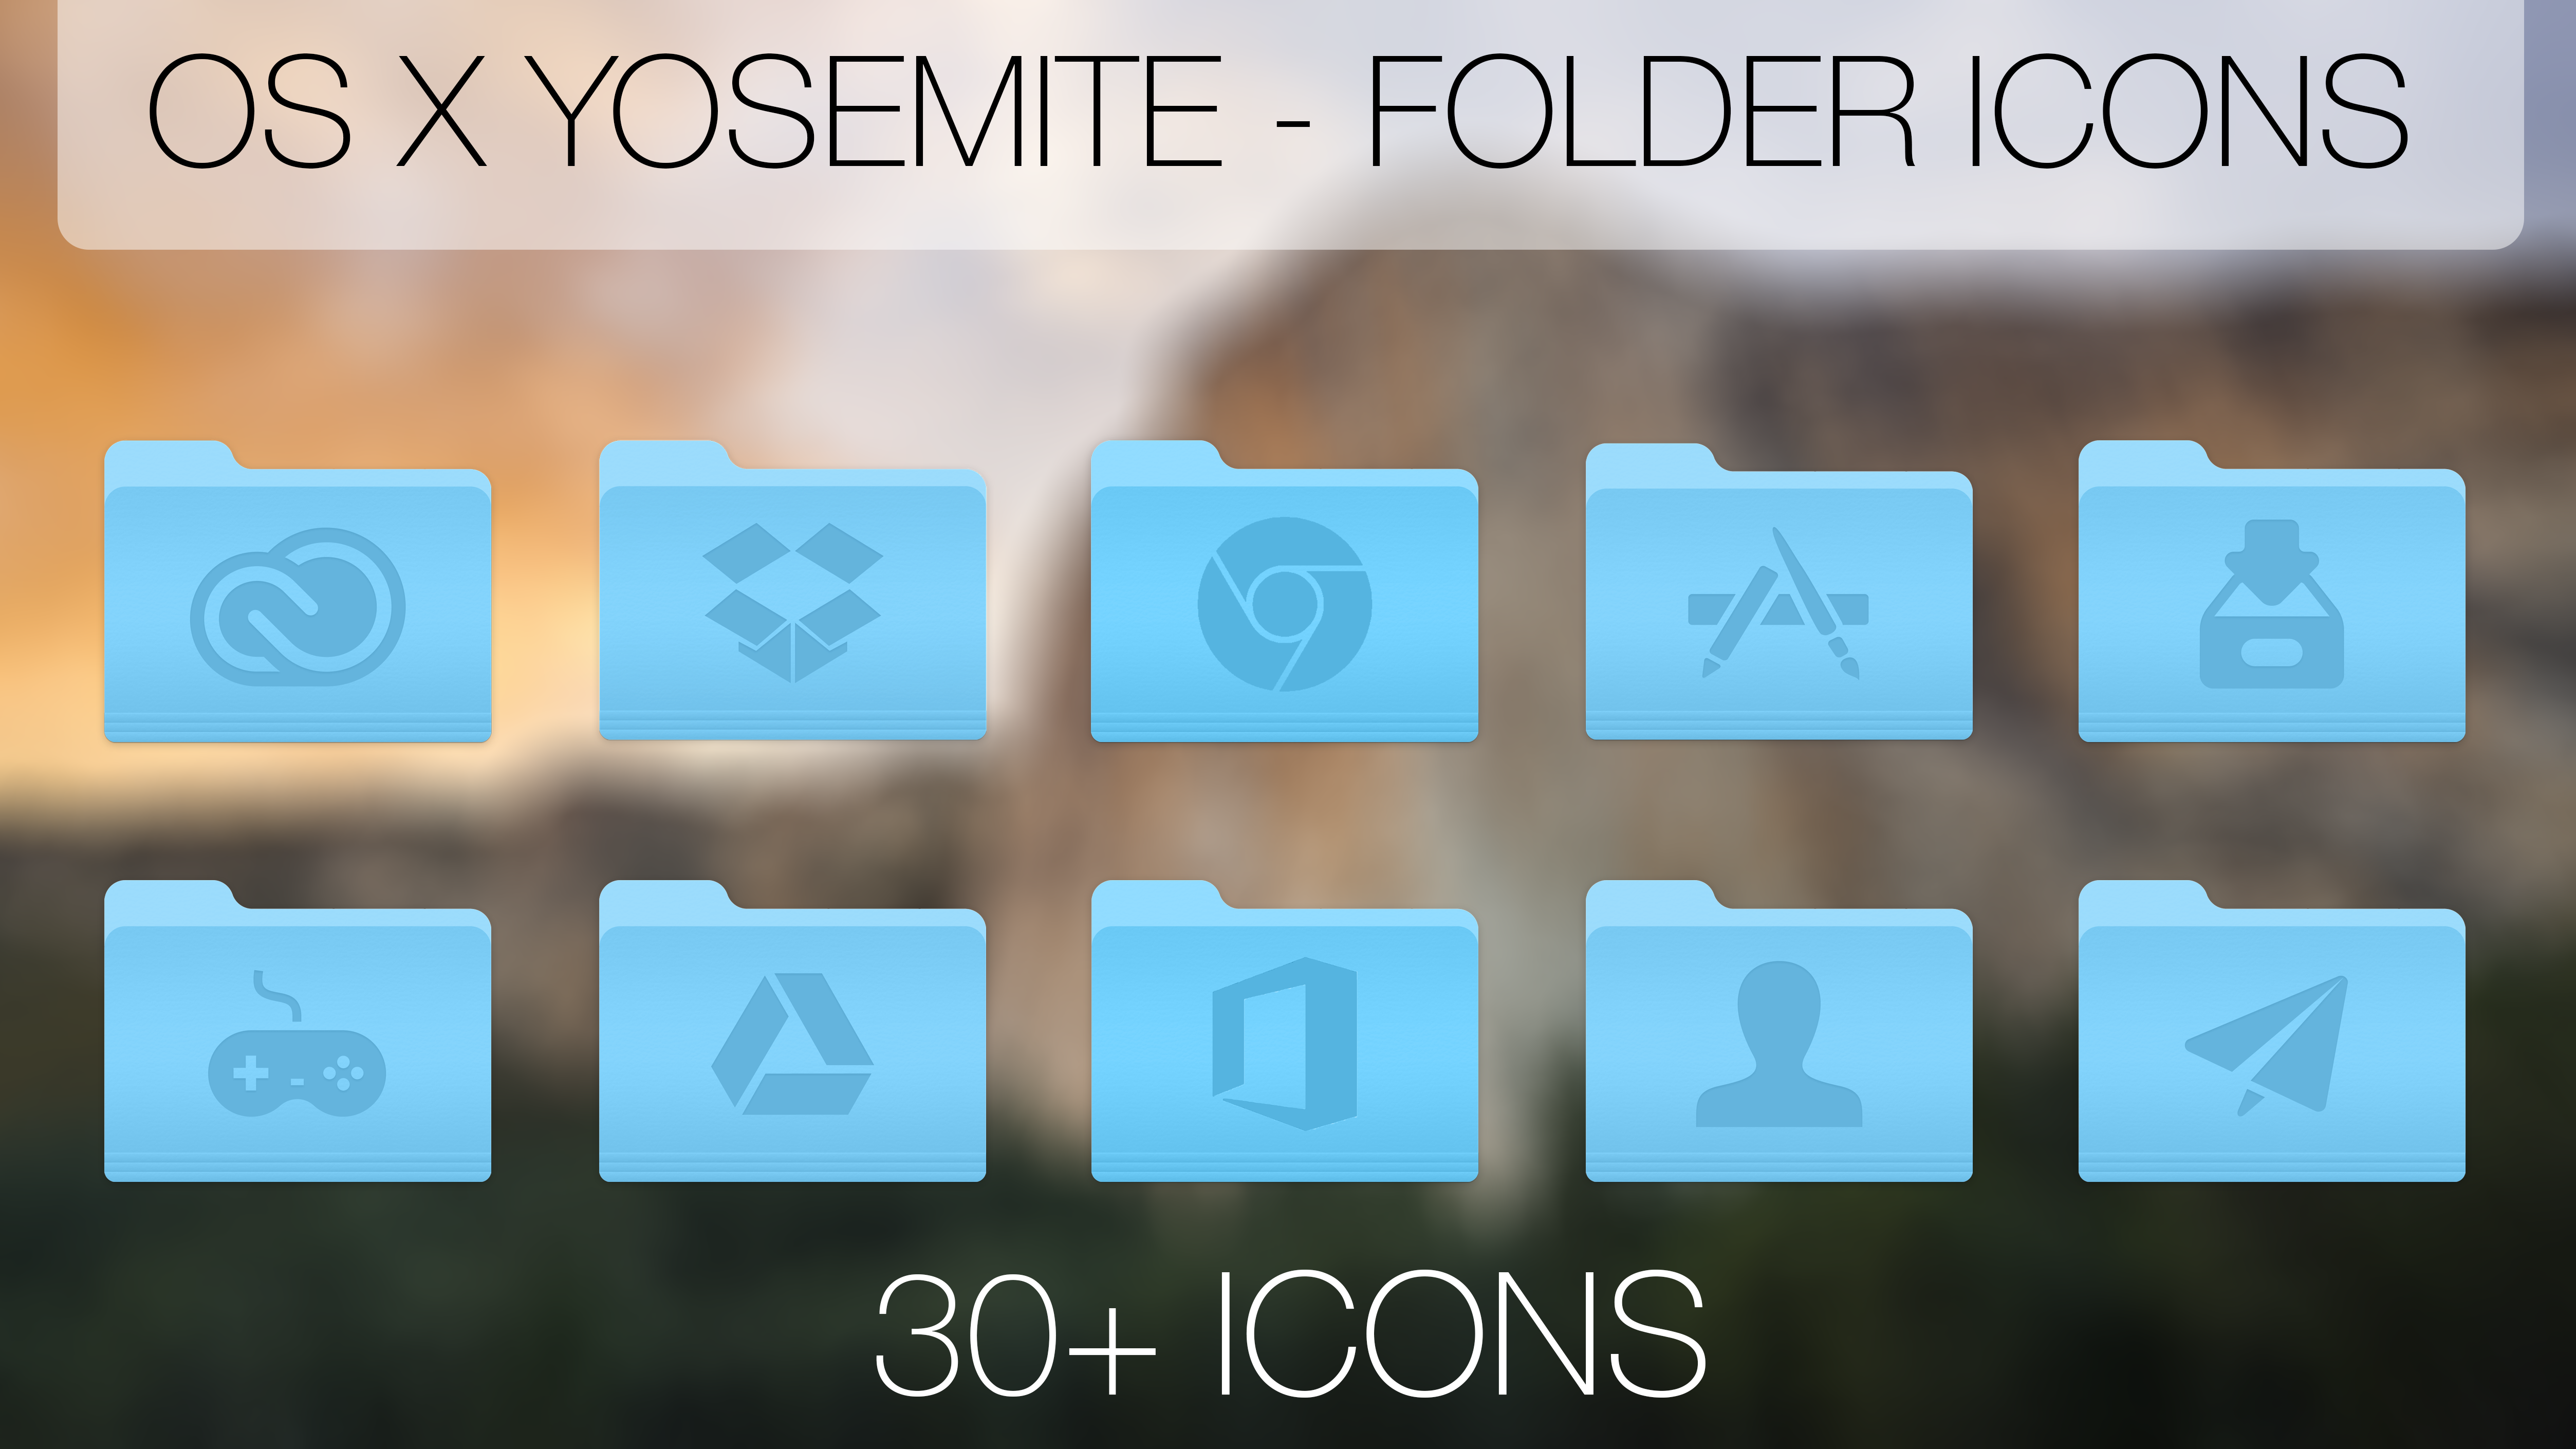 mac os x leopard icon pack for windows 10 2016